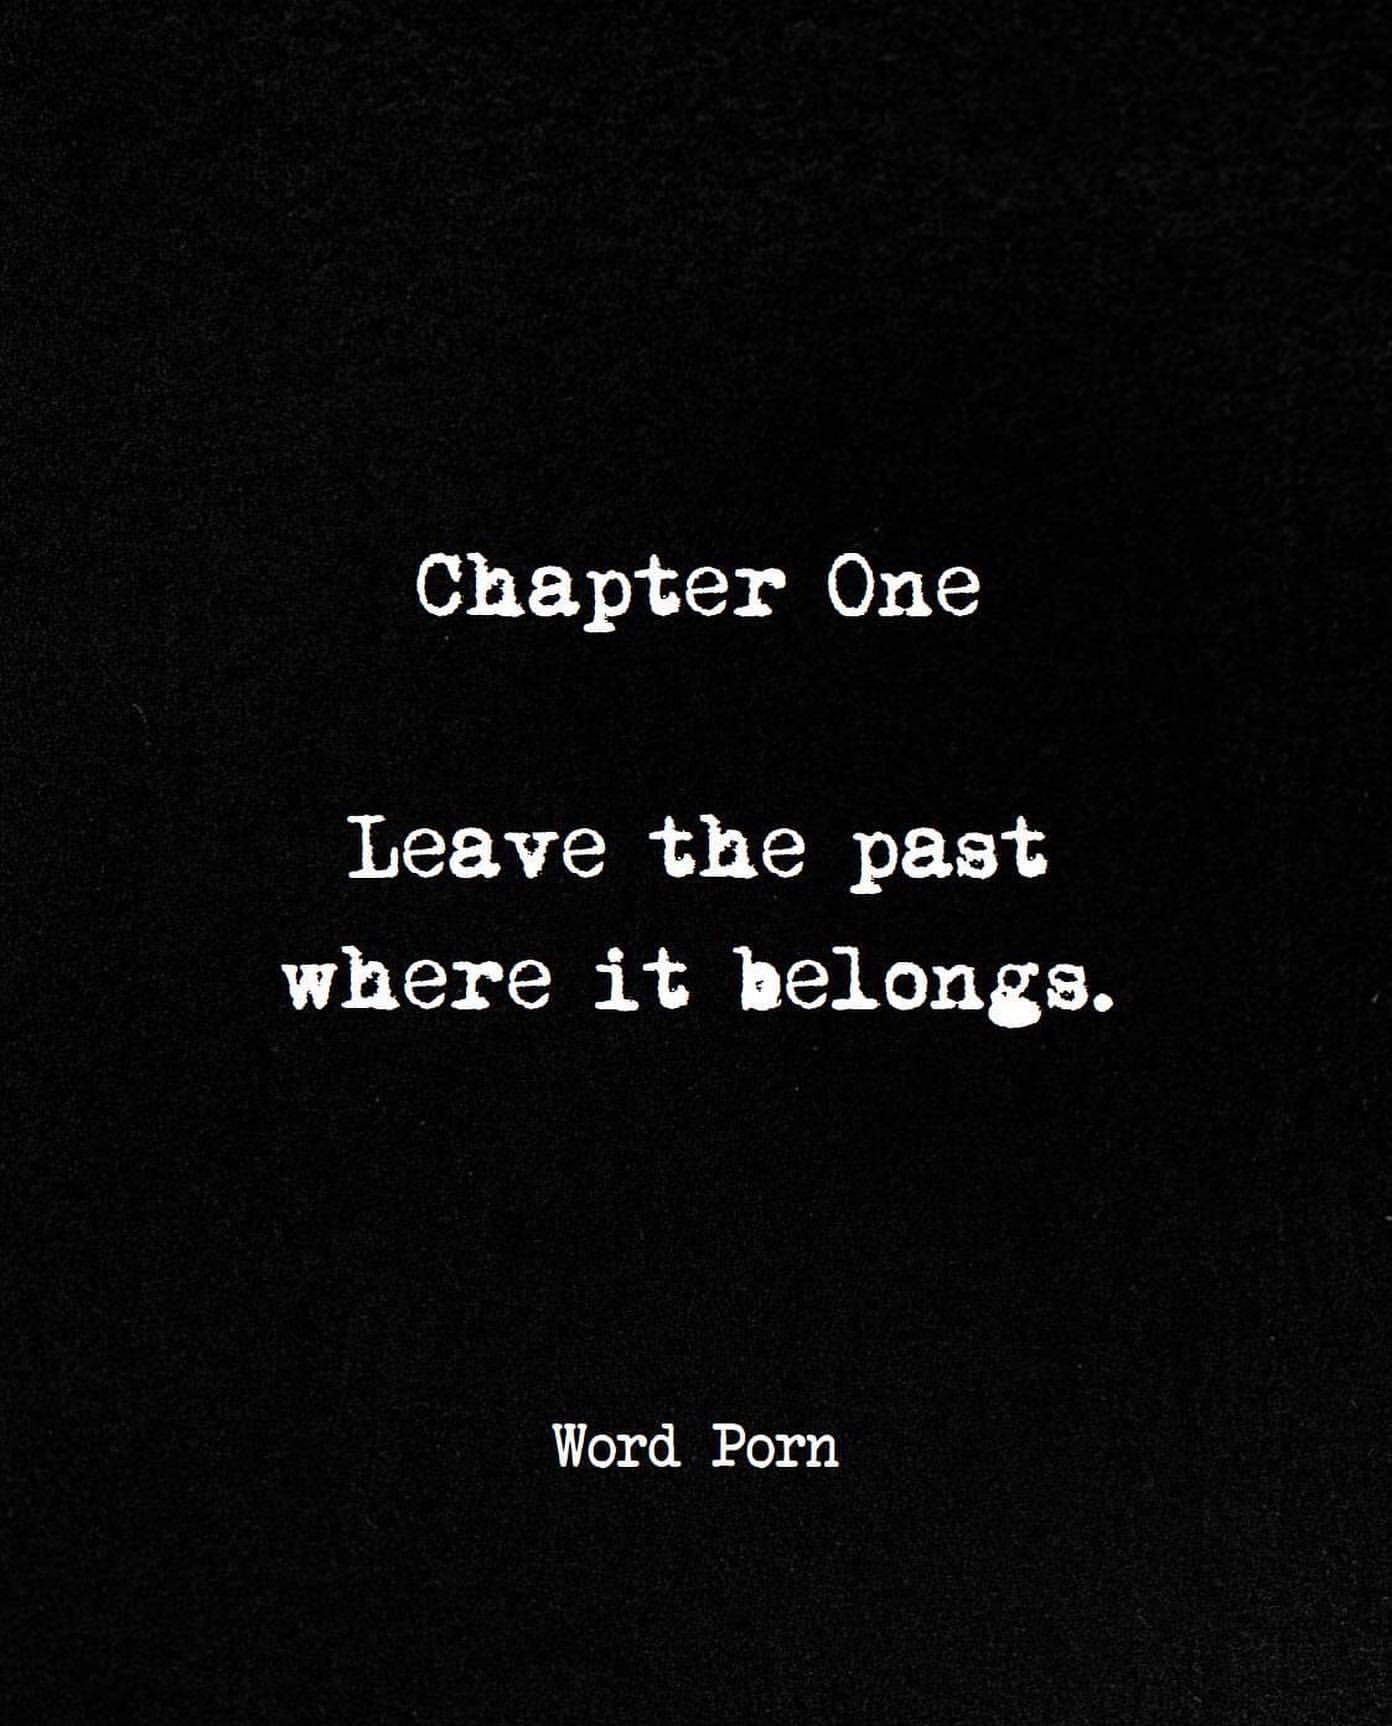 Chapter One. Leave the past where it belongs.